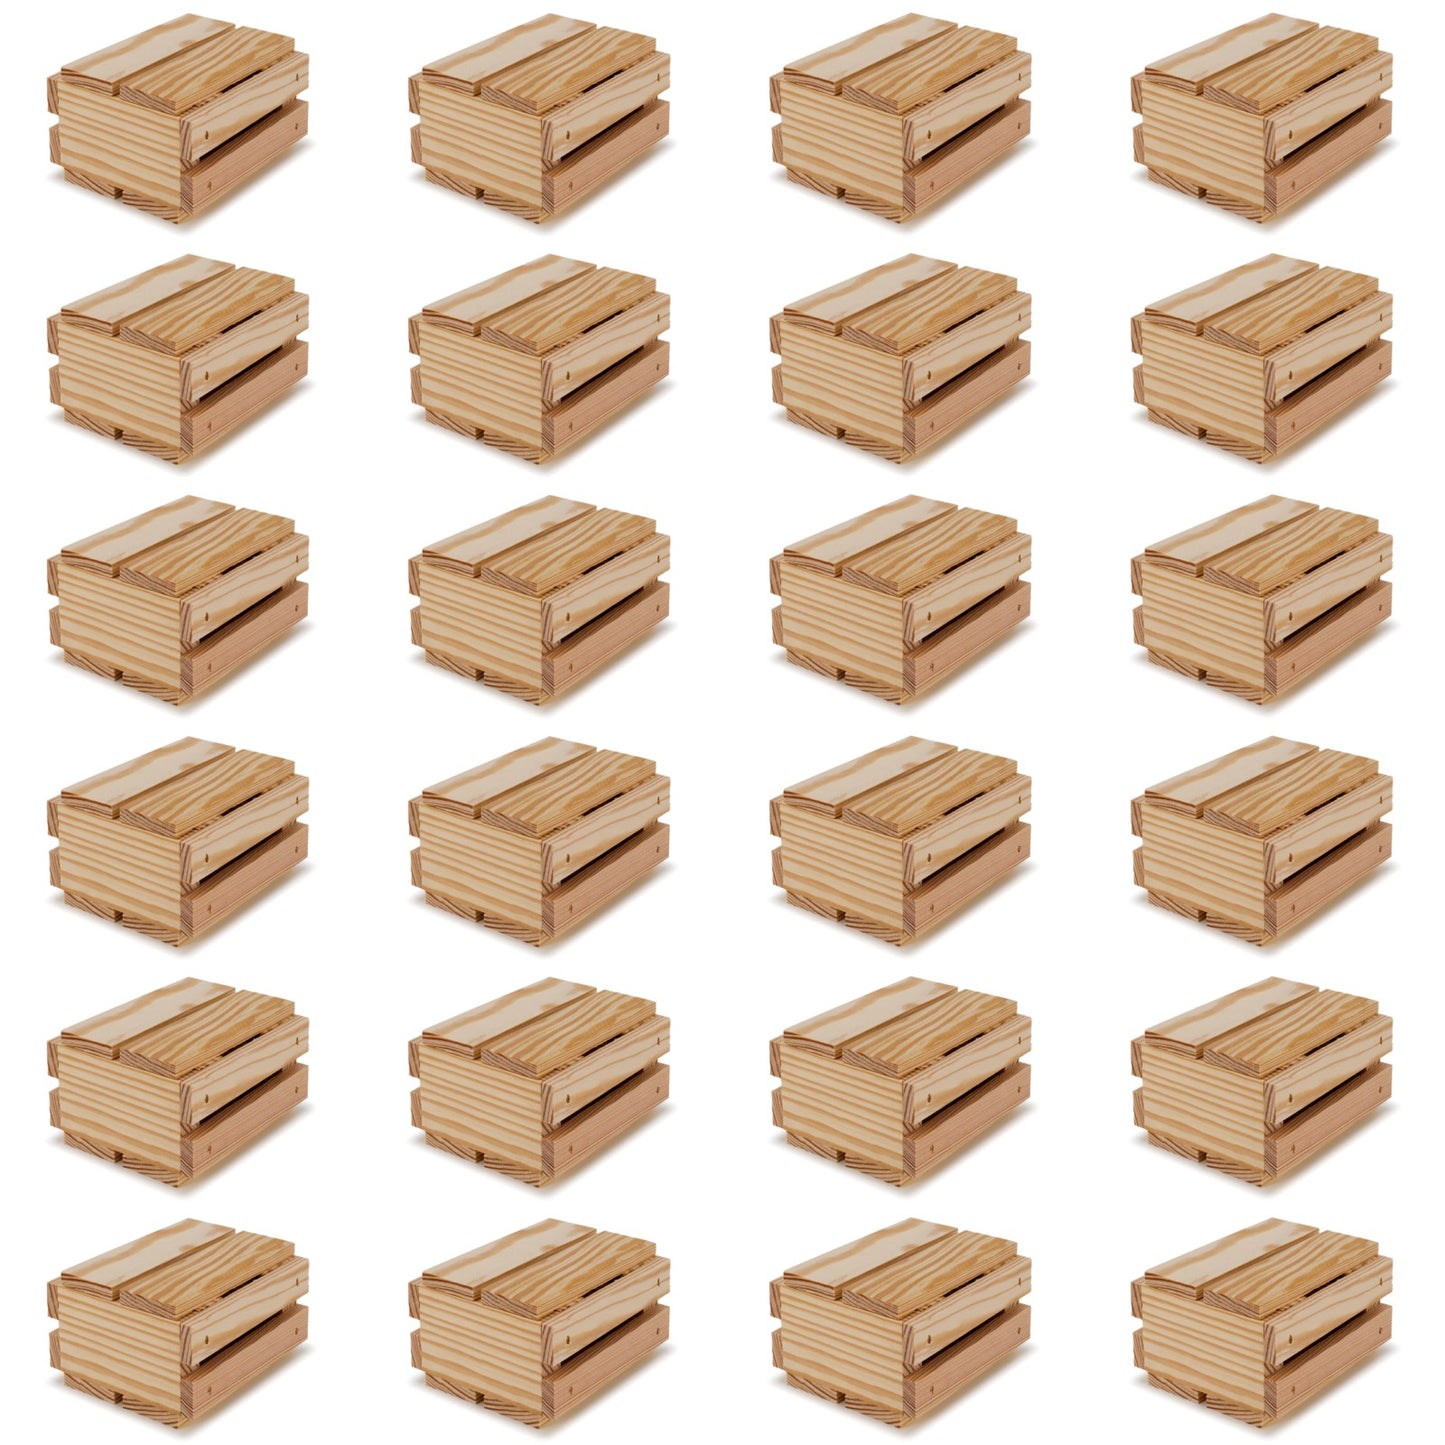 24 Small wooden crates with lid 4x4x2.5